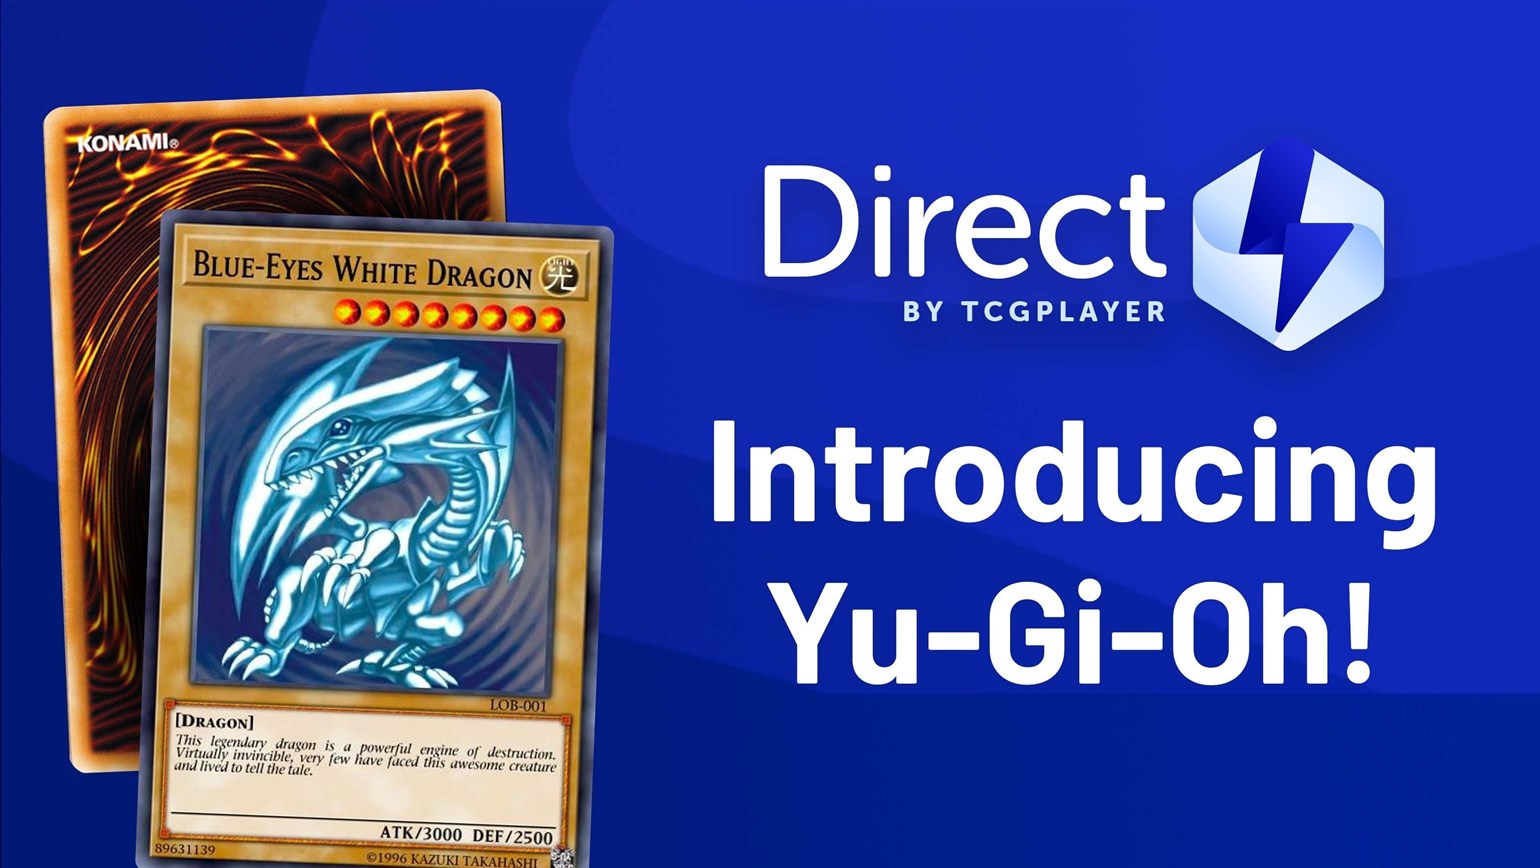 Introducing Yu-Gi-Oh! for Direct by TCGplayer